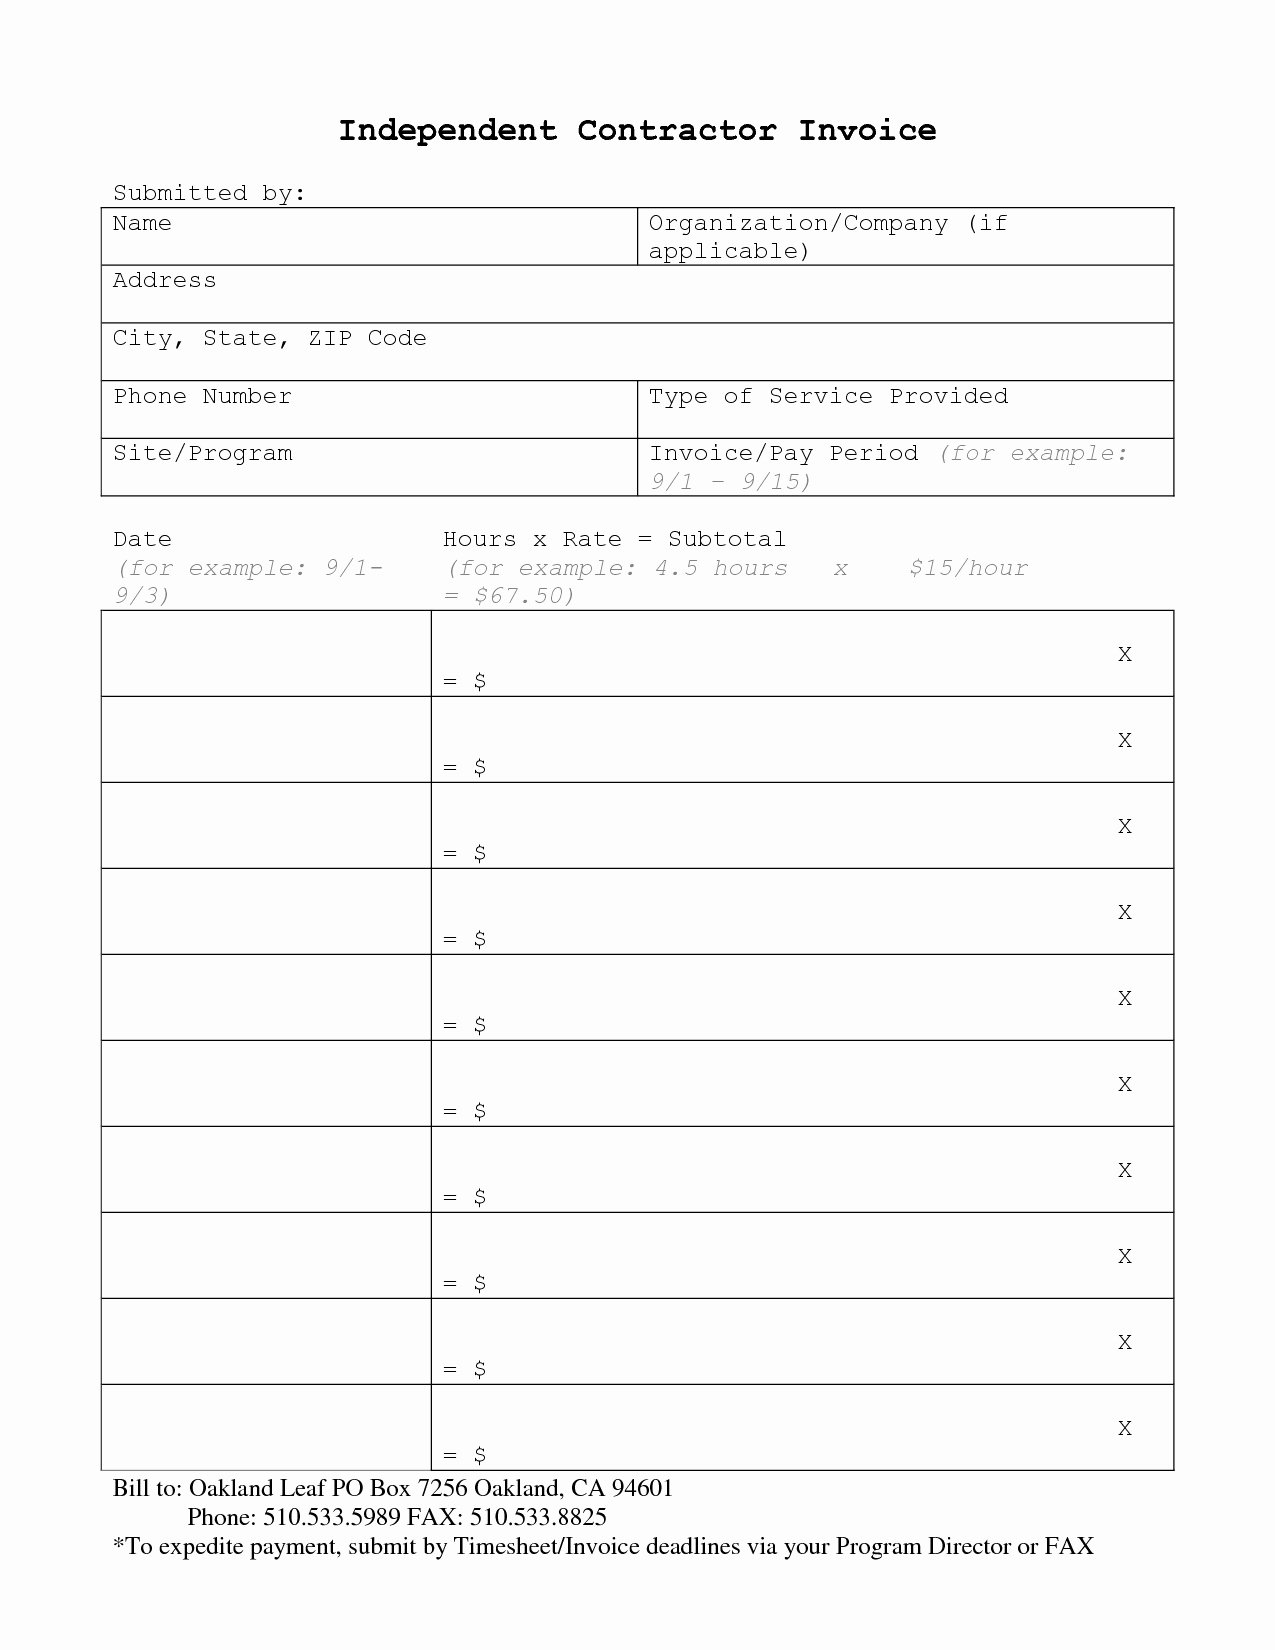 Independent Contractor Invoice Template Free Inspirational Independent Contractor Invoice Invoice Template Ideas